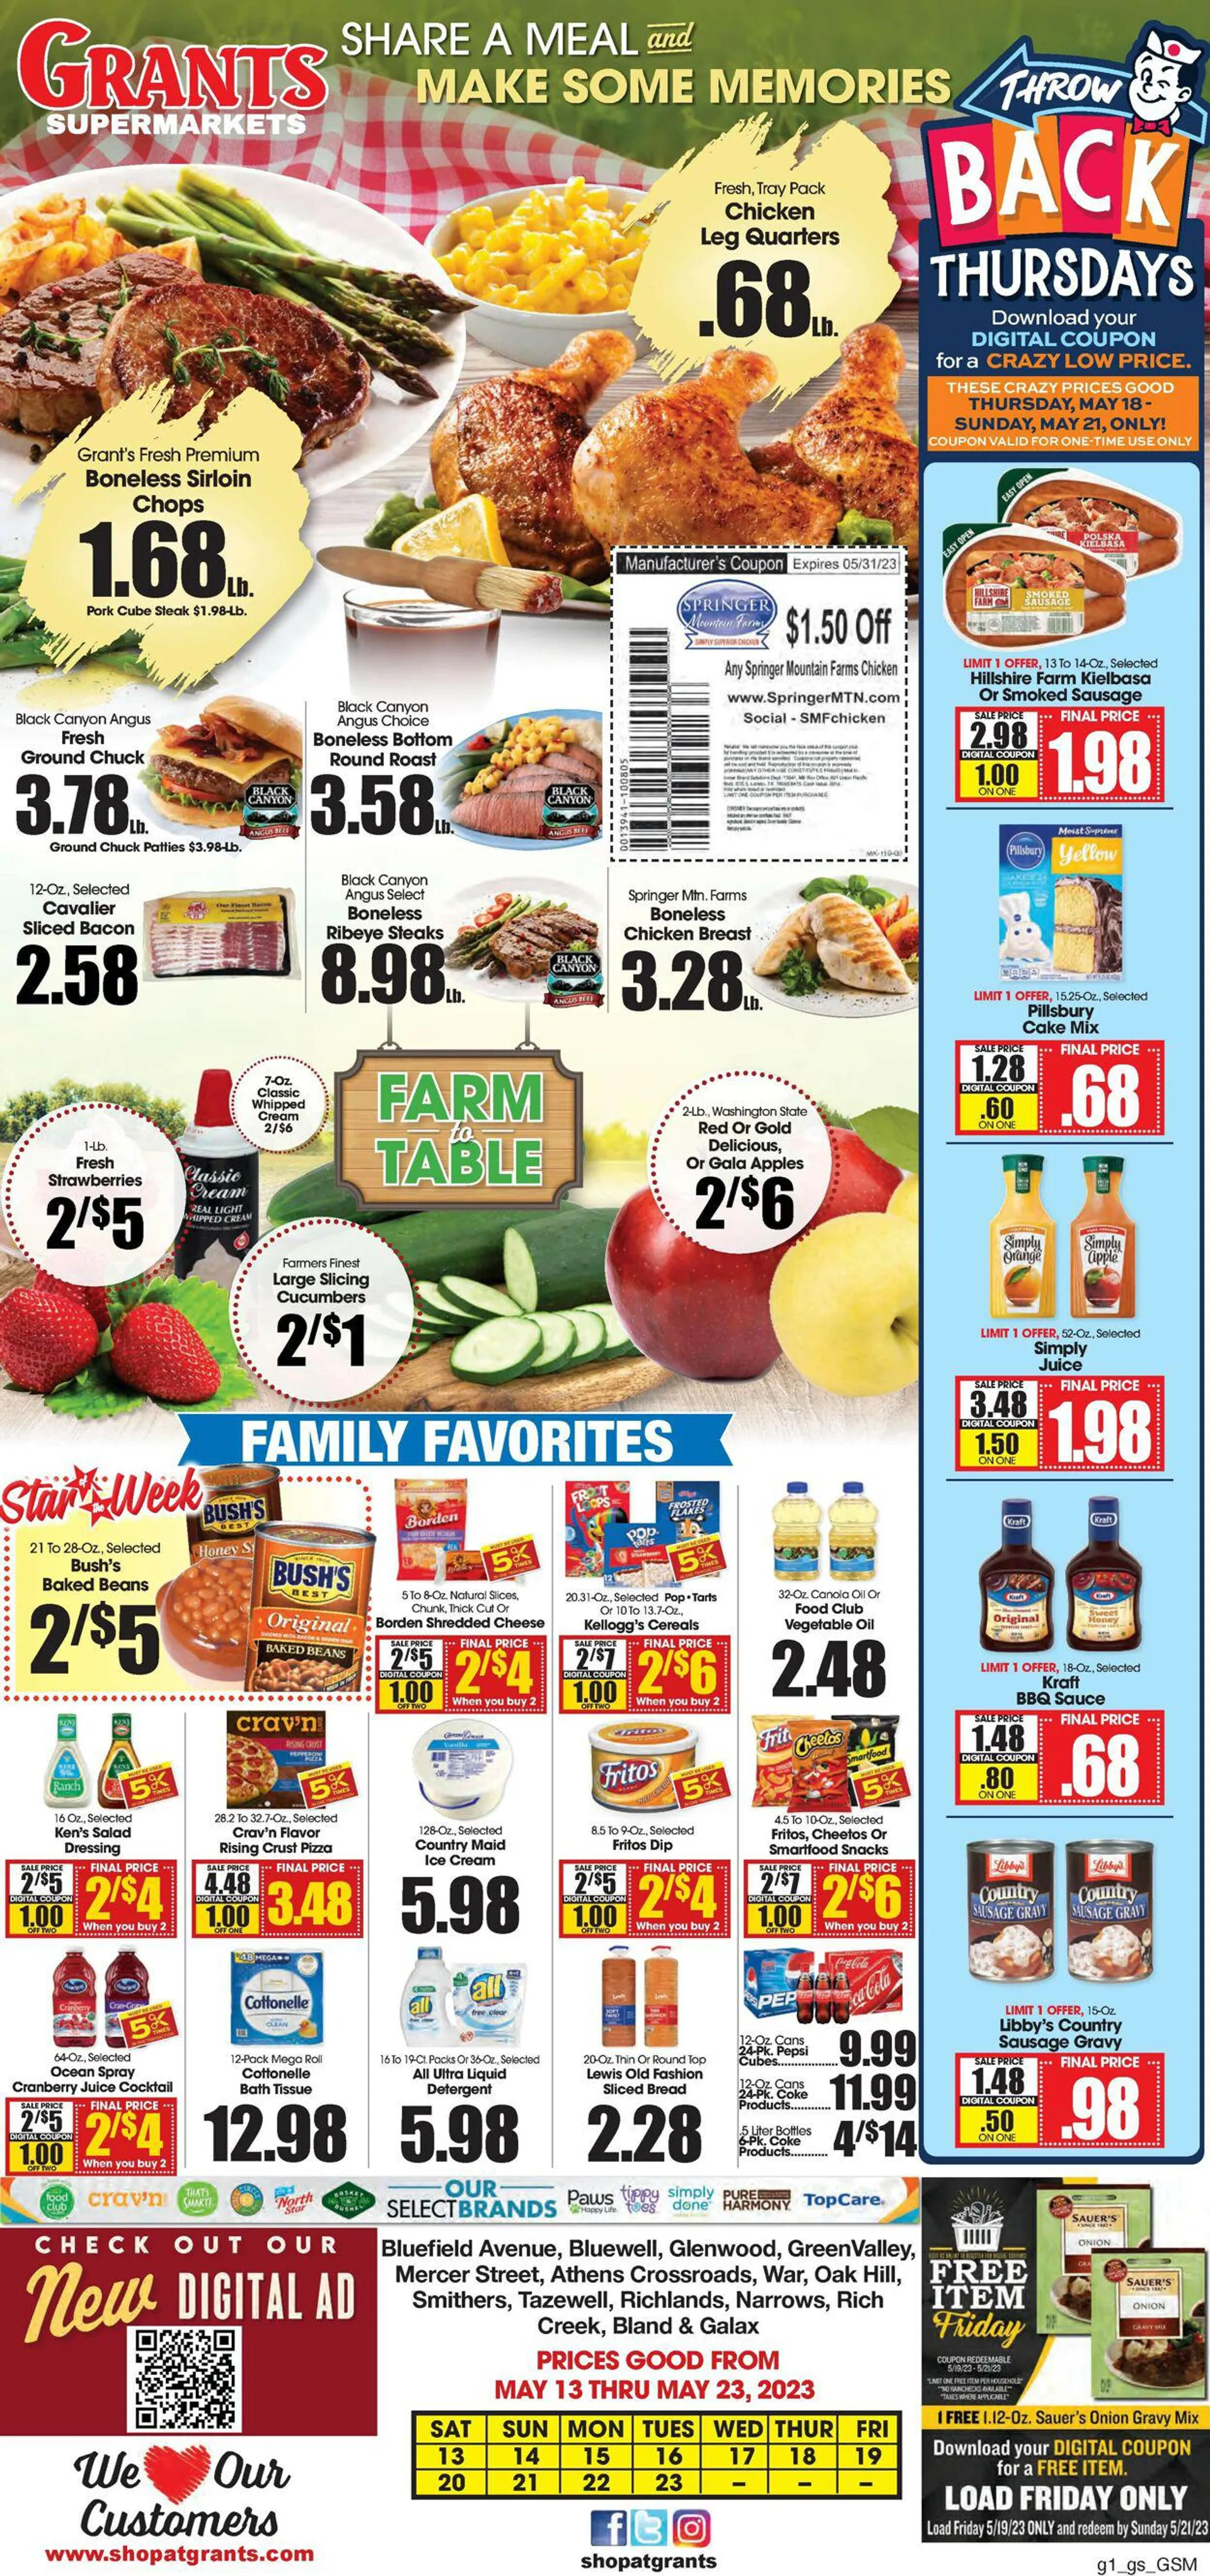 Grants Supermarket Current weekly ad - 1